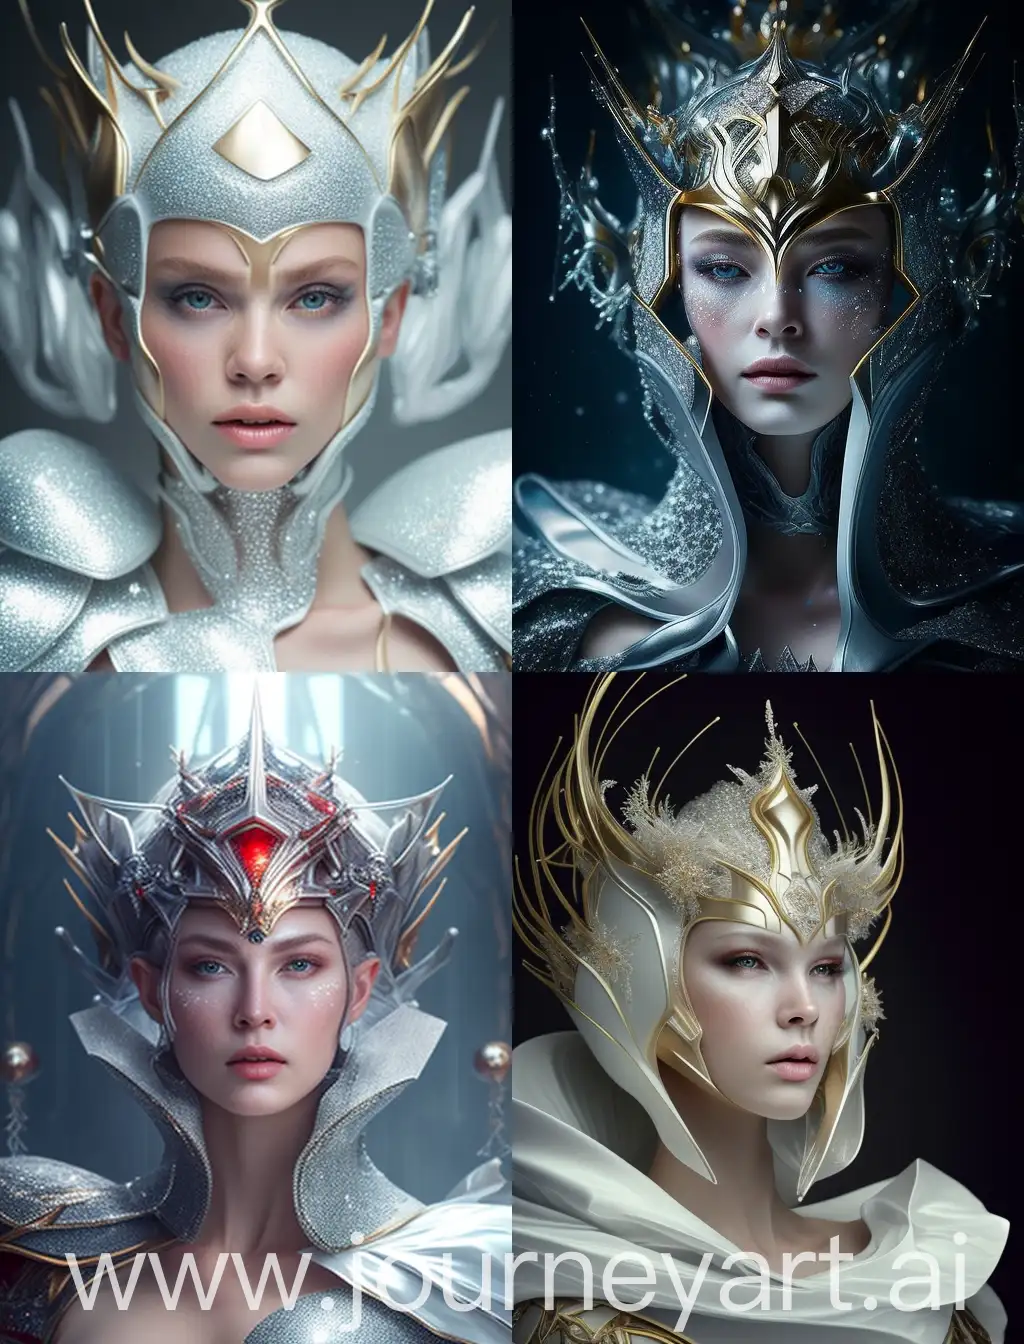 In the realm of futuristic ice harmony, the woman emerges as a vision of absolute perfection. Her helmet, meticulously crafted from glistening ice, captures the essence of elegance and innovation, refracting the crimson and golden lights into a dazzling display of radiance. With eyes adorned by delicate icy crystals aglow with ethereal hues, she exudes an otherworldly allure that transcends the boundaries of time and space. Enveloped by the serene tranquility of the frozen landscape, she stands as a pinnacle of beauty and grace, seamlessly blending with the futuristic ice world in a harmonious symphony of celestial wonder.